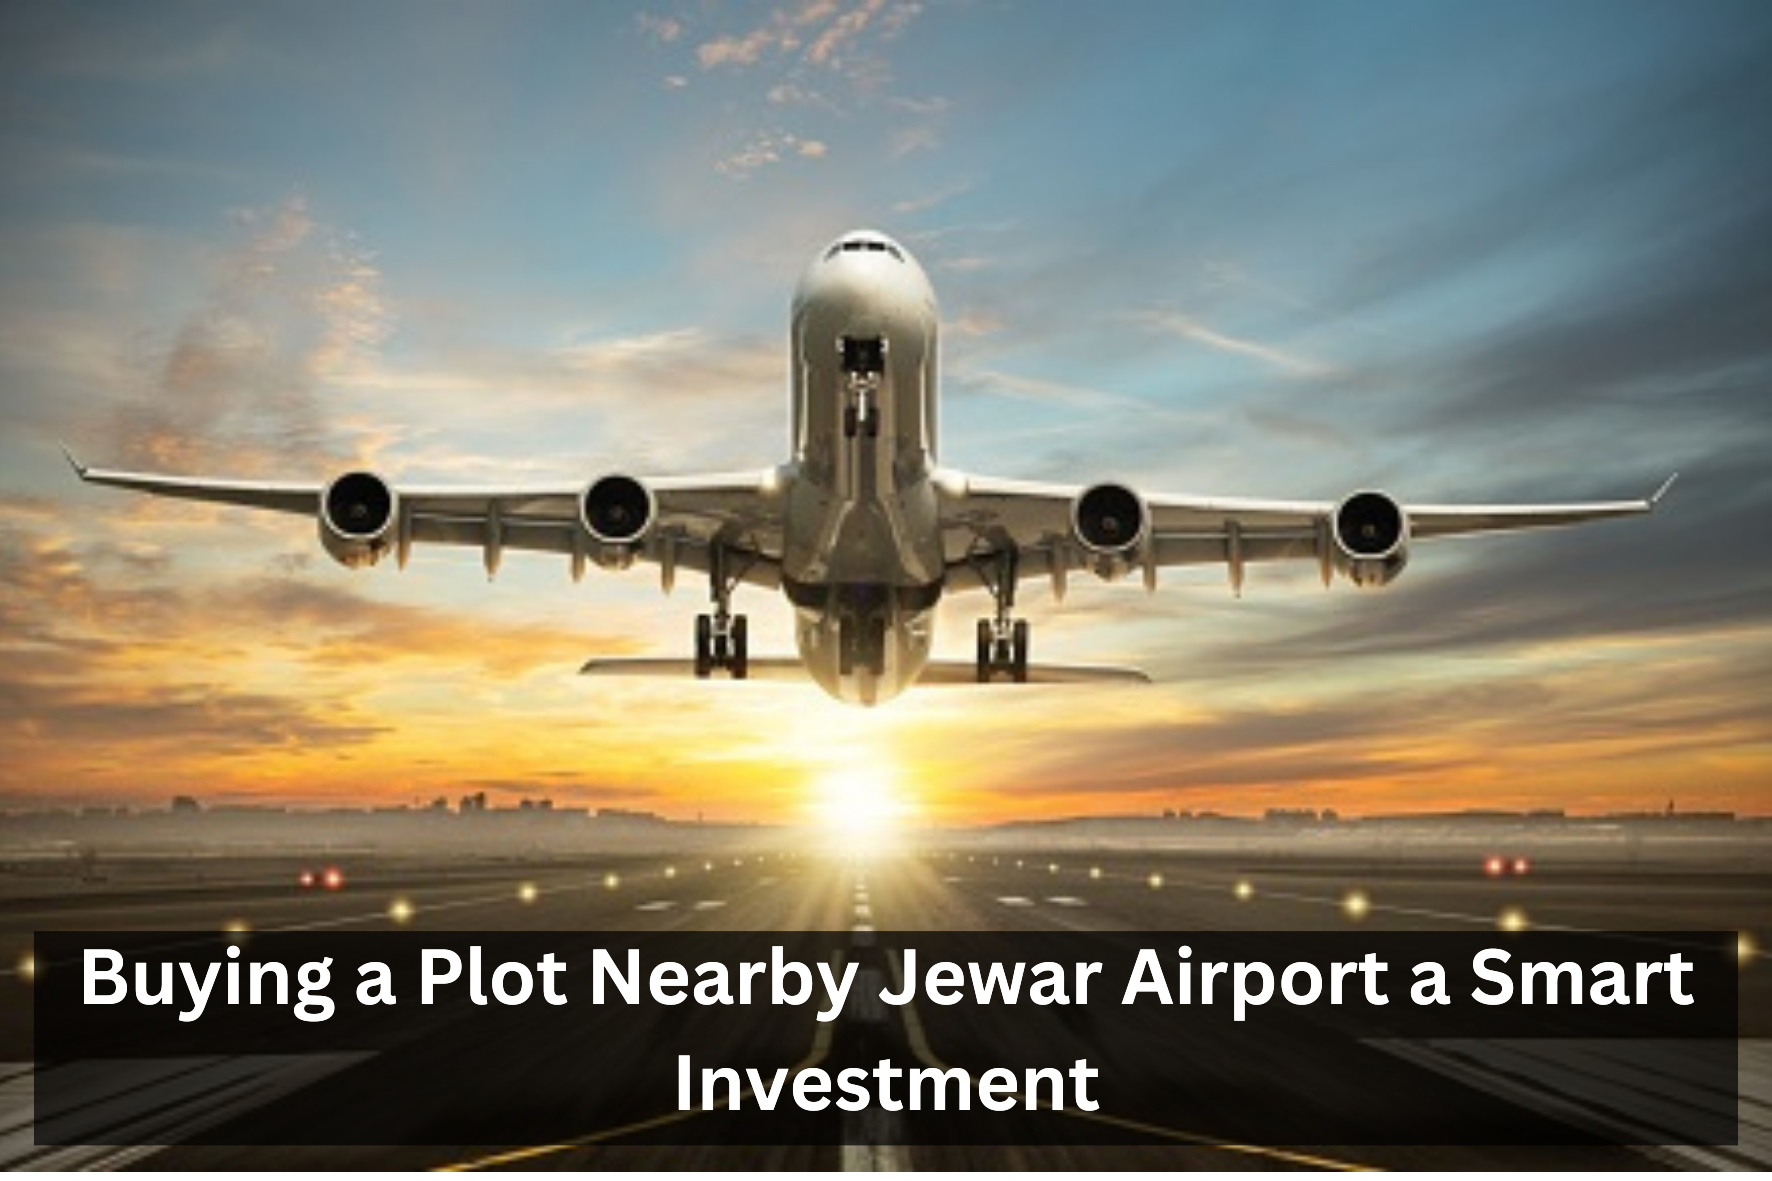 uploads/blog/Buying_a_Plot_Nearby_to_Jewar_Airport_a_Smart_Investment_(1).png